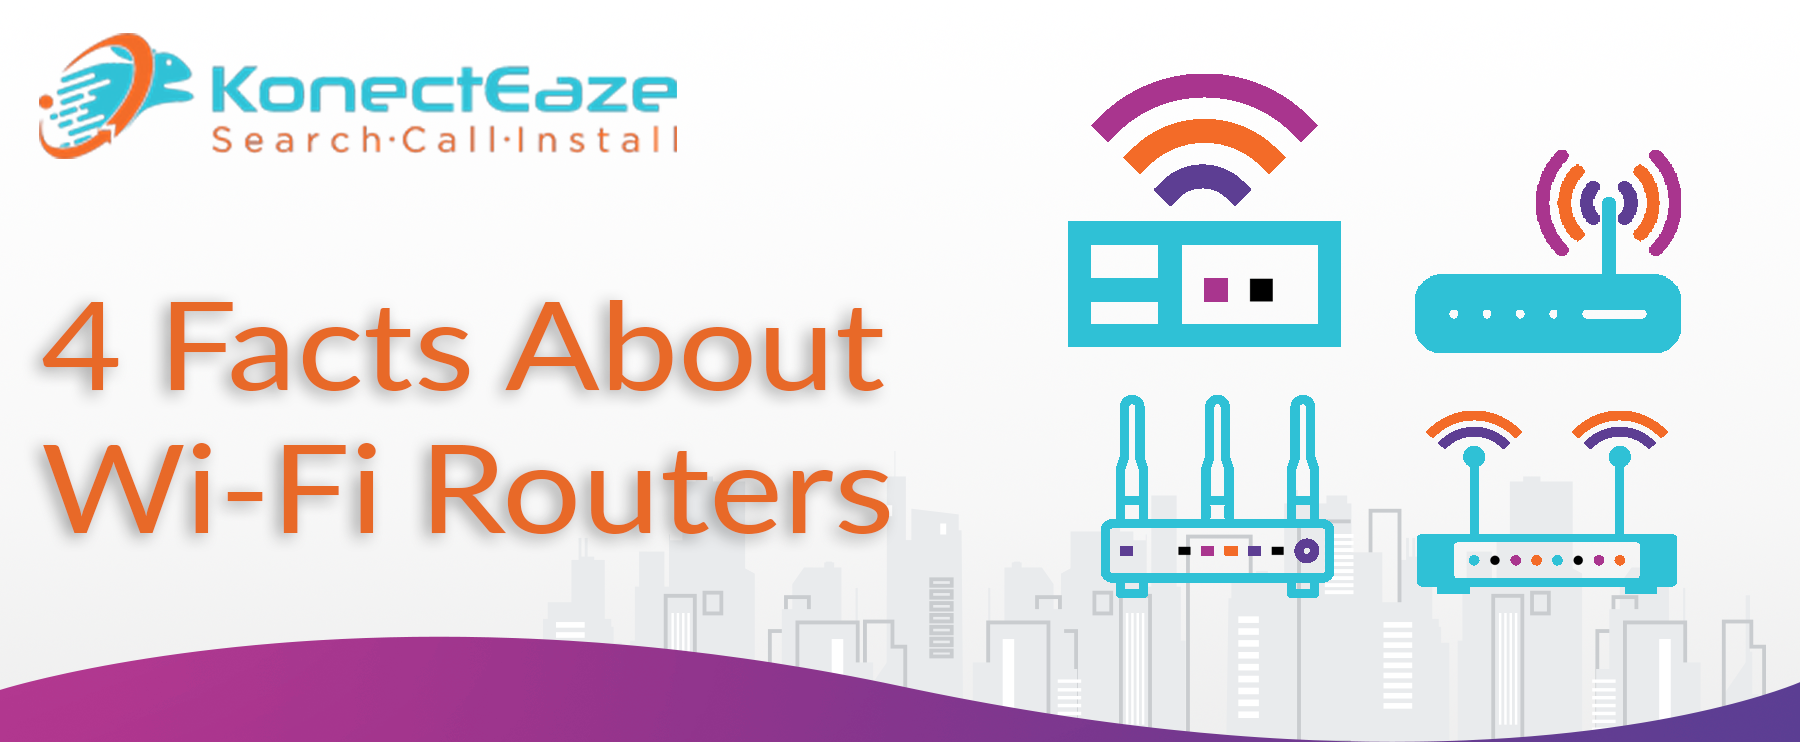 4 facts about Wi-Fi routers Internet service providers won't tell you